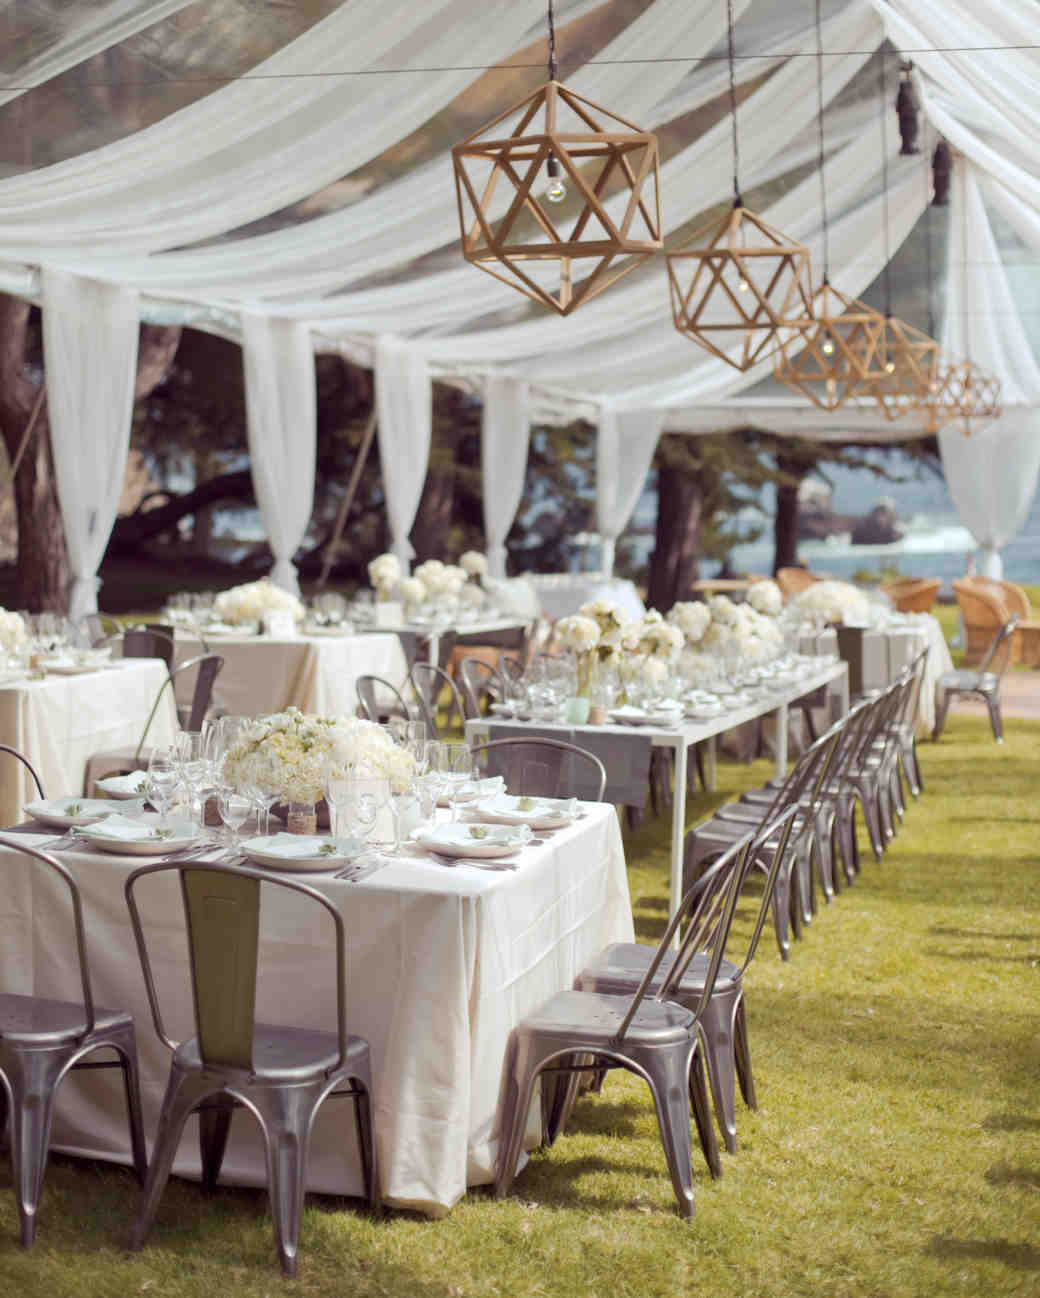 How To Decorate A Tent For A Wedding
 33 Tent Decorating Ideas to Upgrade Your Wedding Reception